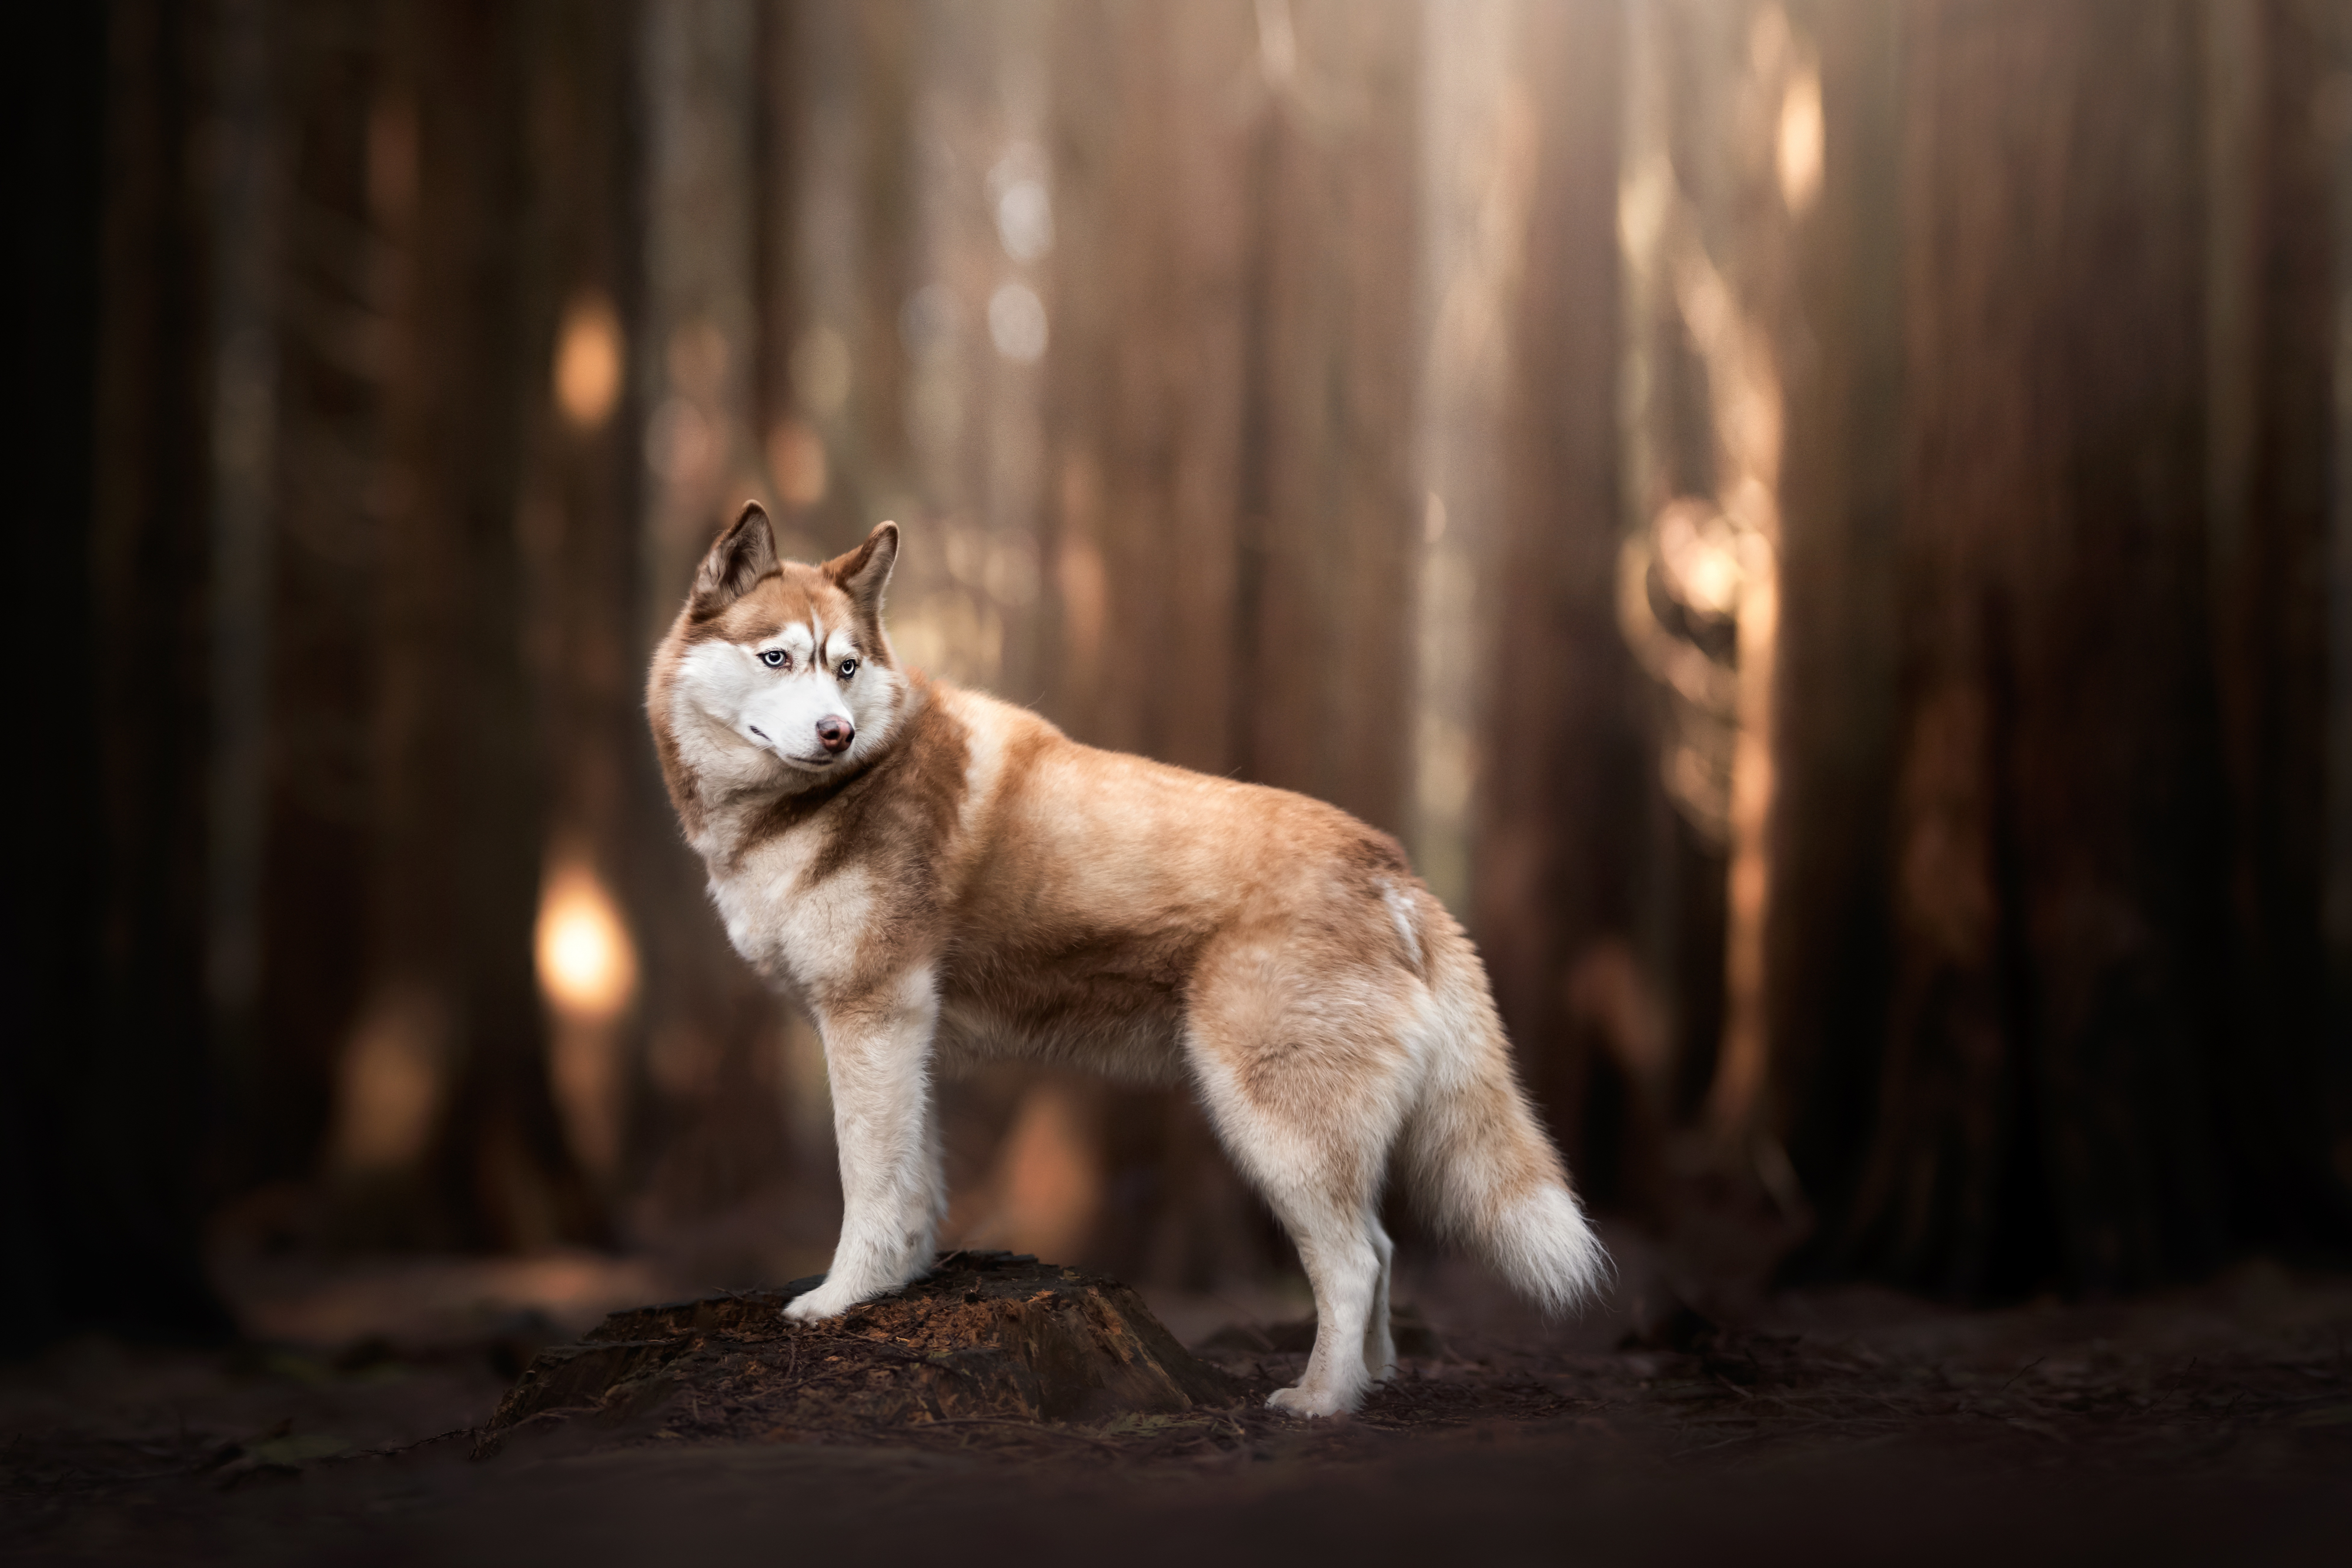 Download the Best HD Husky Wallpapers for iOS and Android